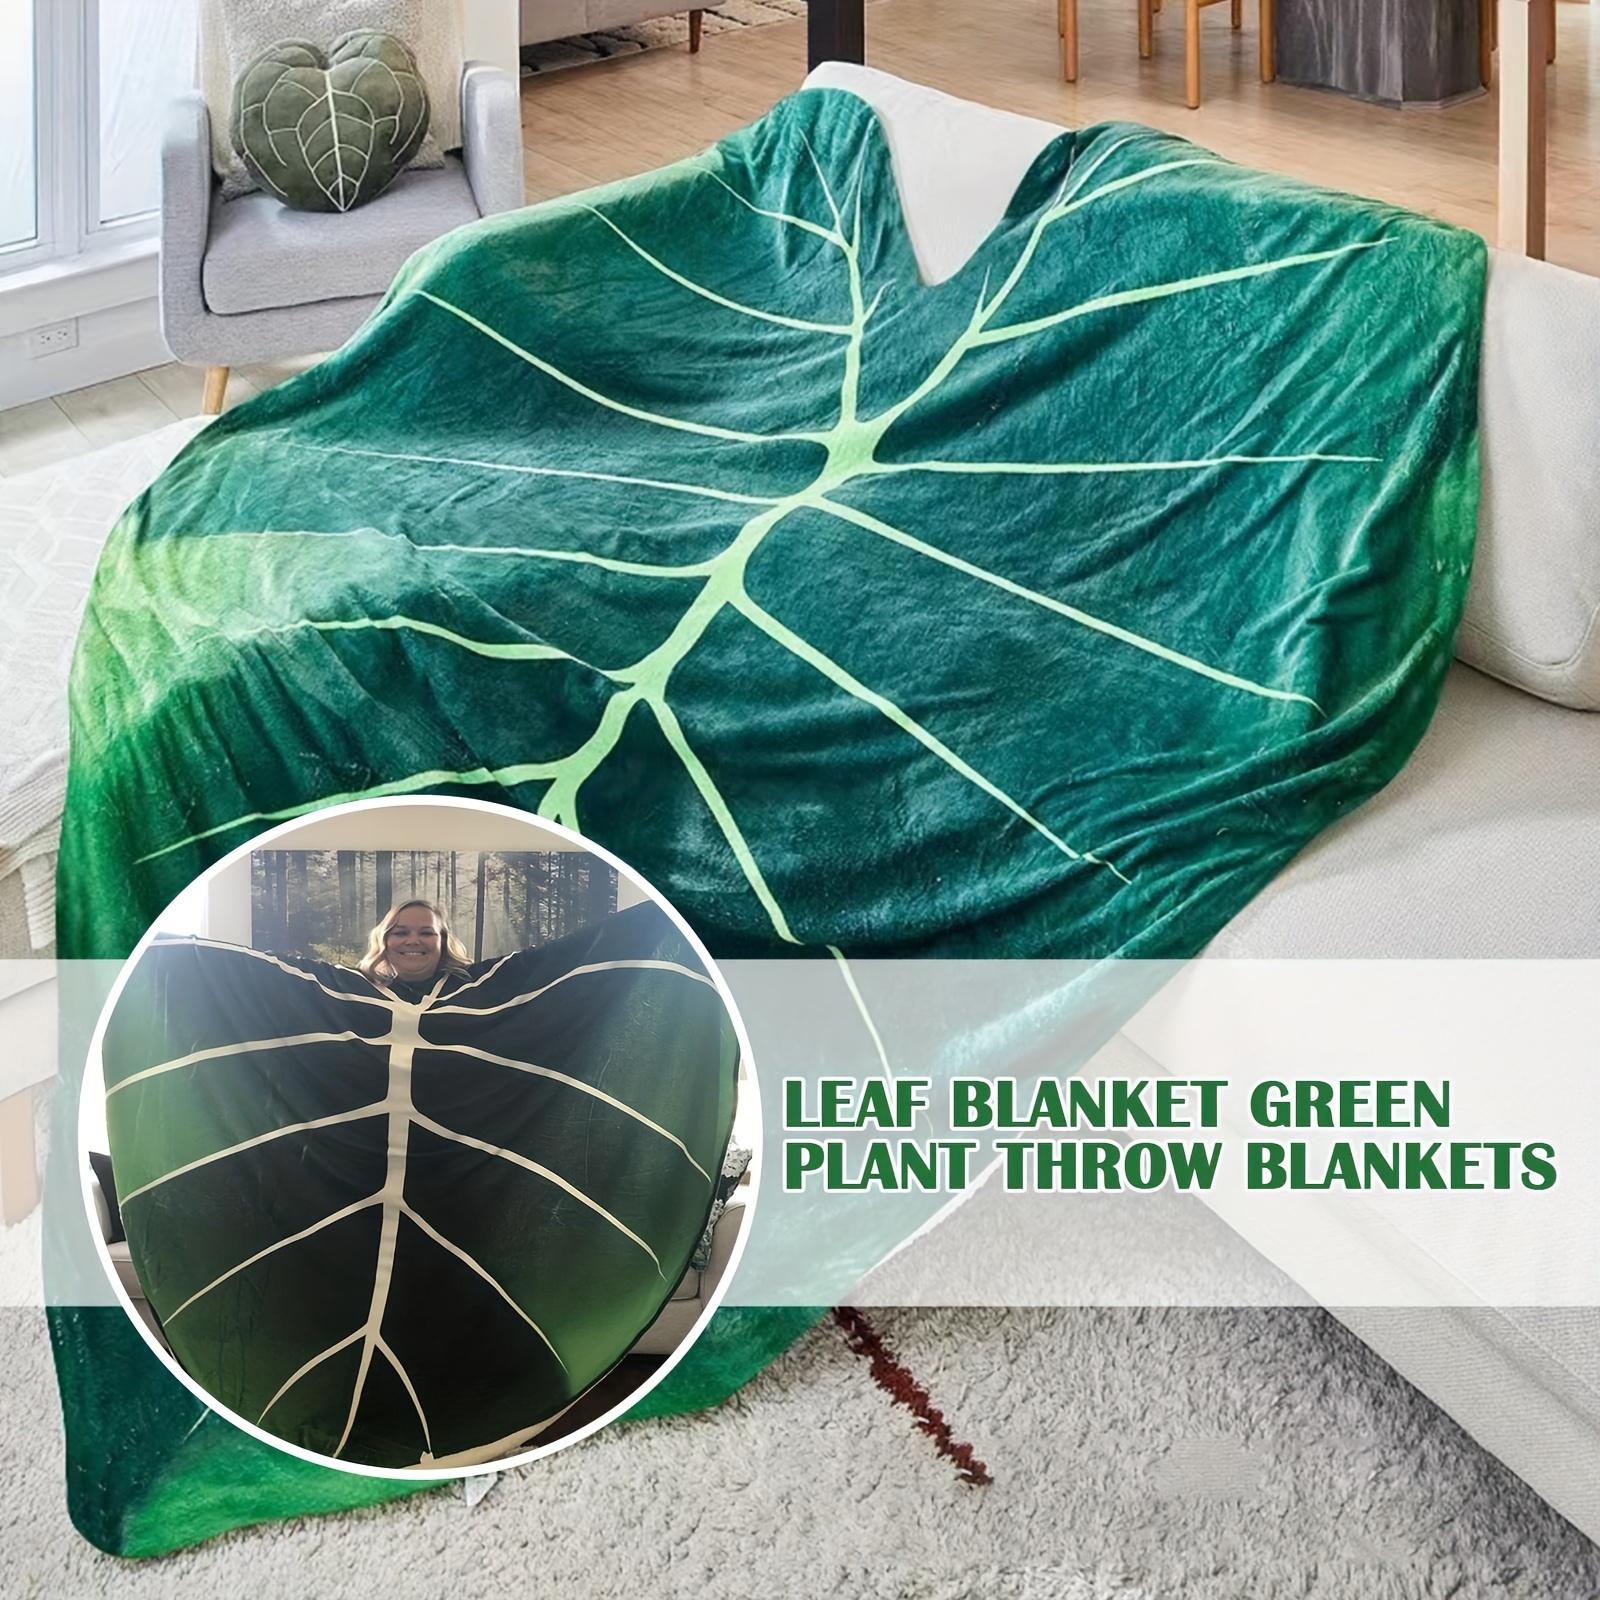 

Soft Geometric Leaf All-season Throw - Chic, Cozy & Versatile Blanket For Home And Travel, Lunch Break, Easy Maintenance